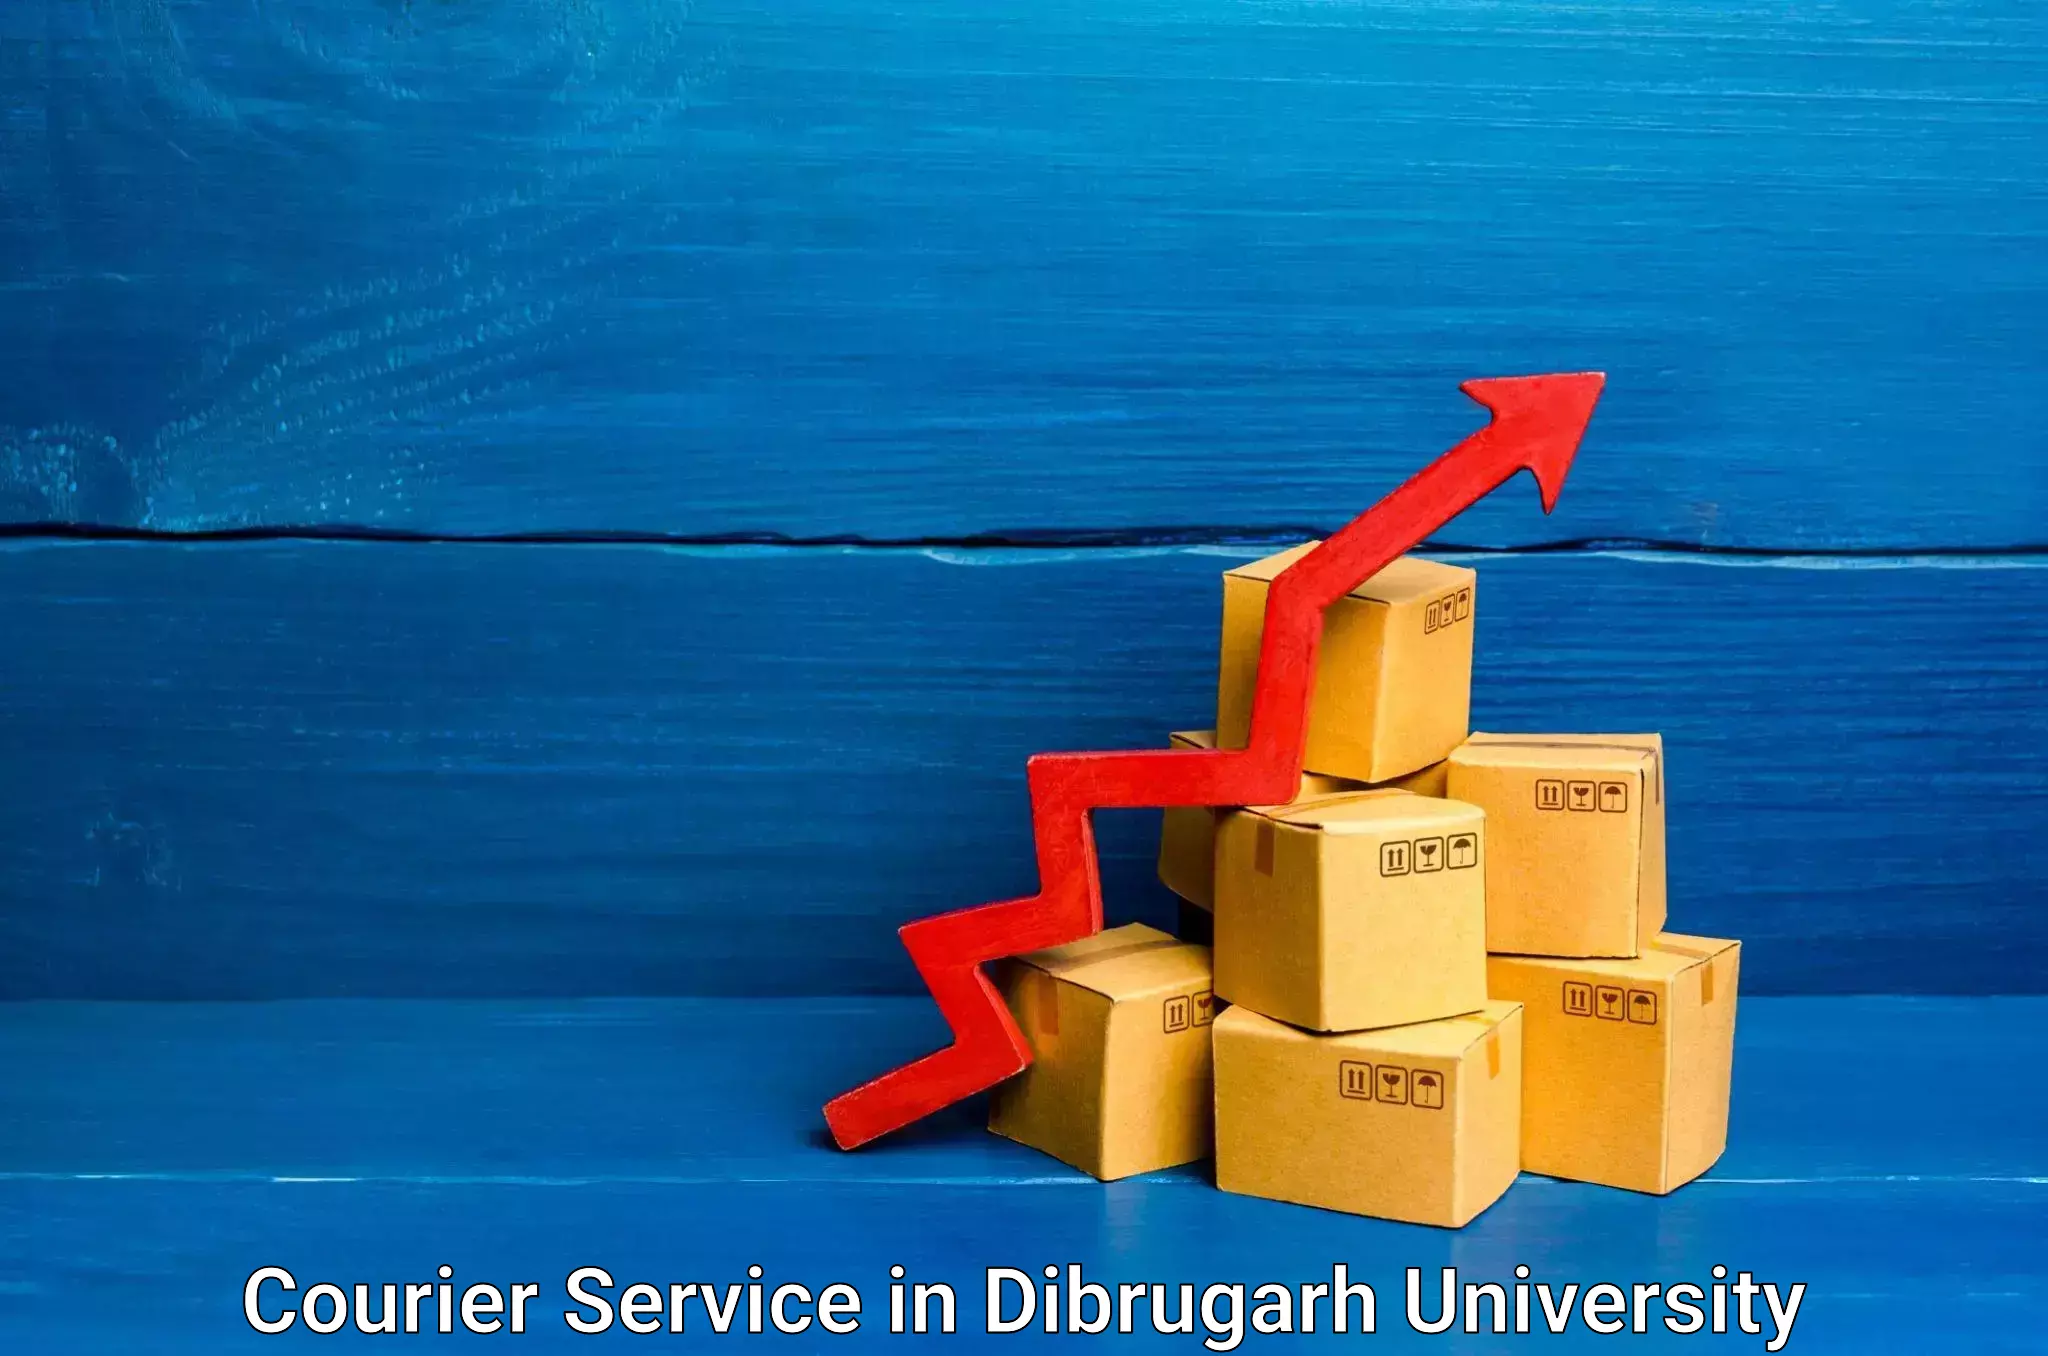 Efficient package consolidation in Dibrugarh University